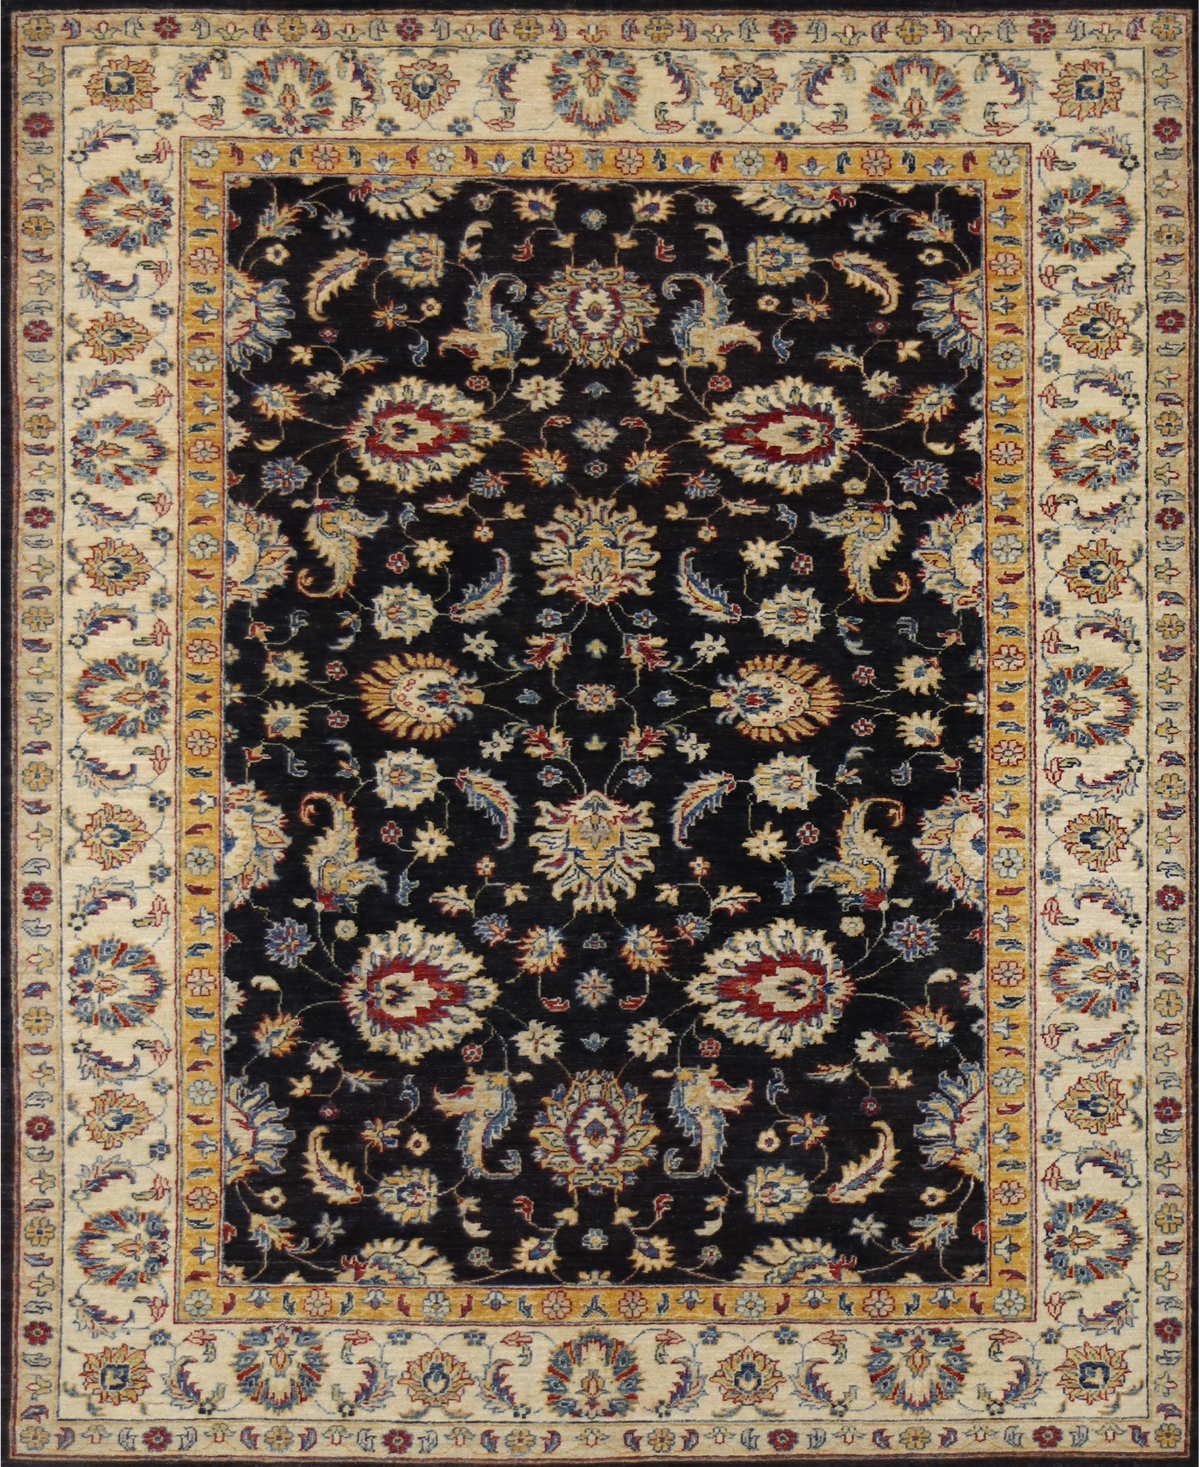 Bb Rugs One of a Kind Mansehra 5'10in x 7'10in Area Rug - Black